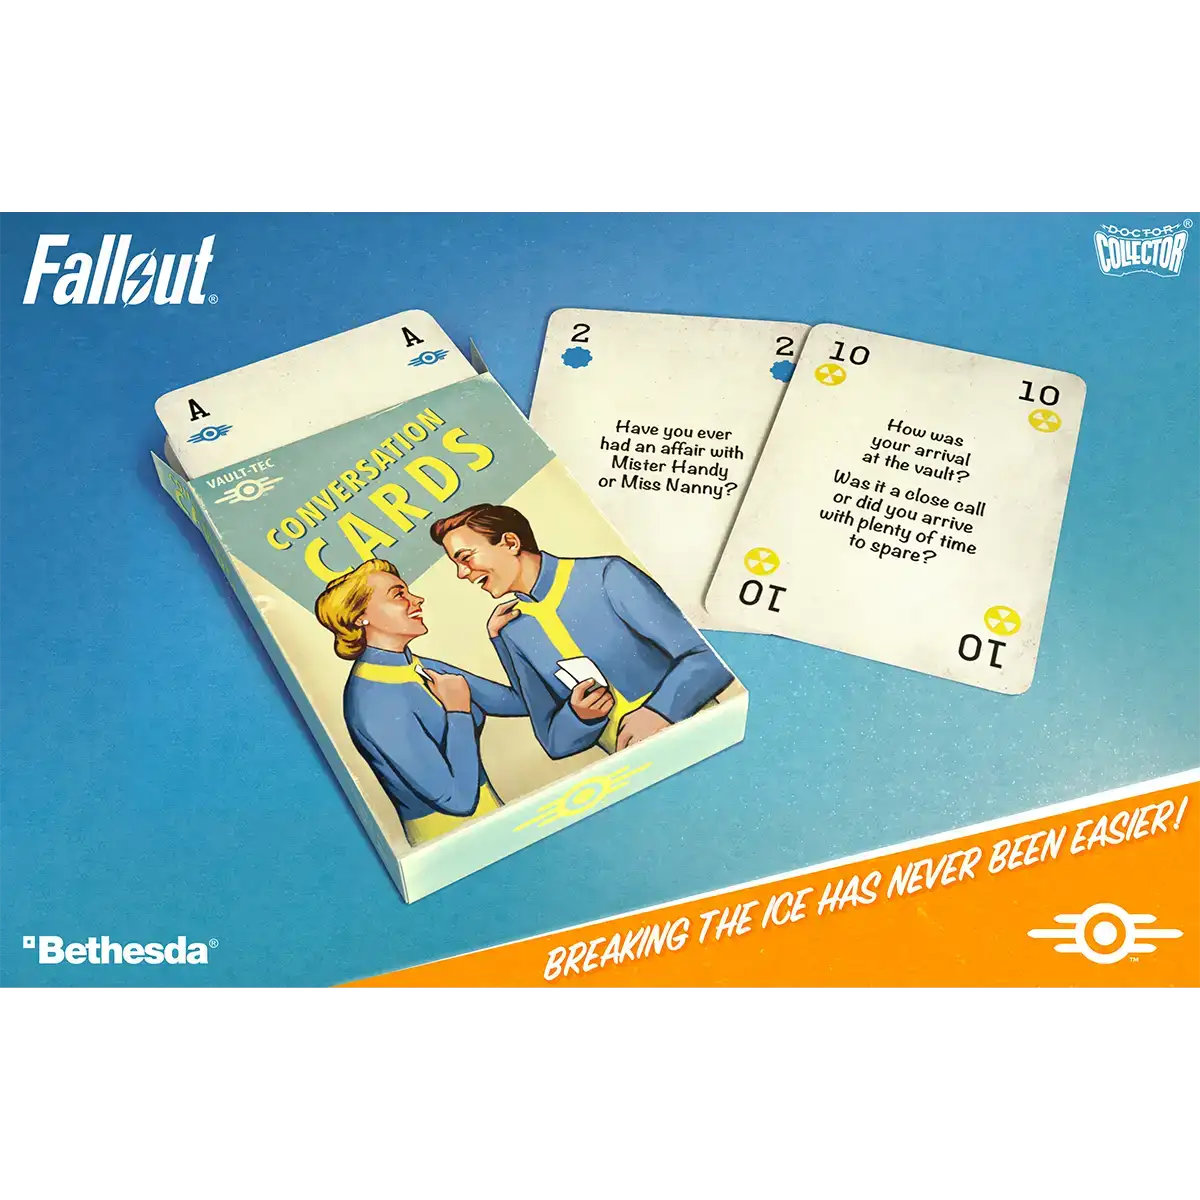 Fallout "Vault Dweller´s Welcome Kit" Image 9